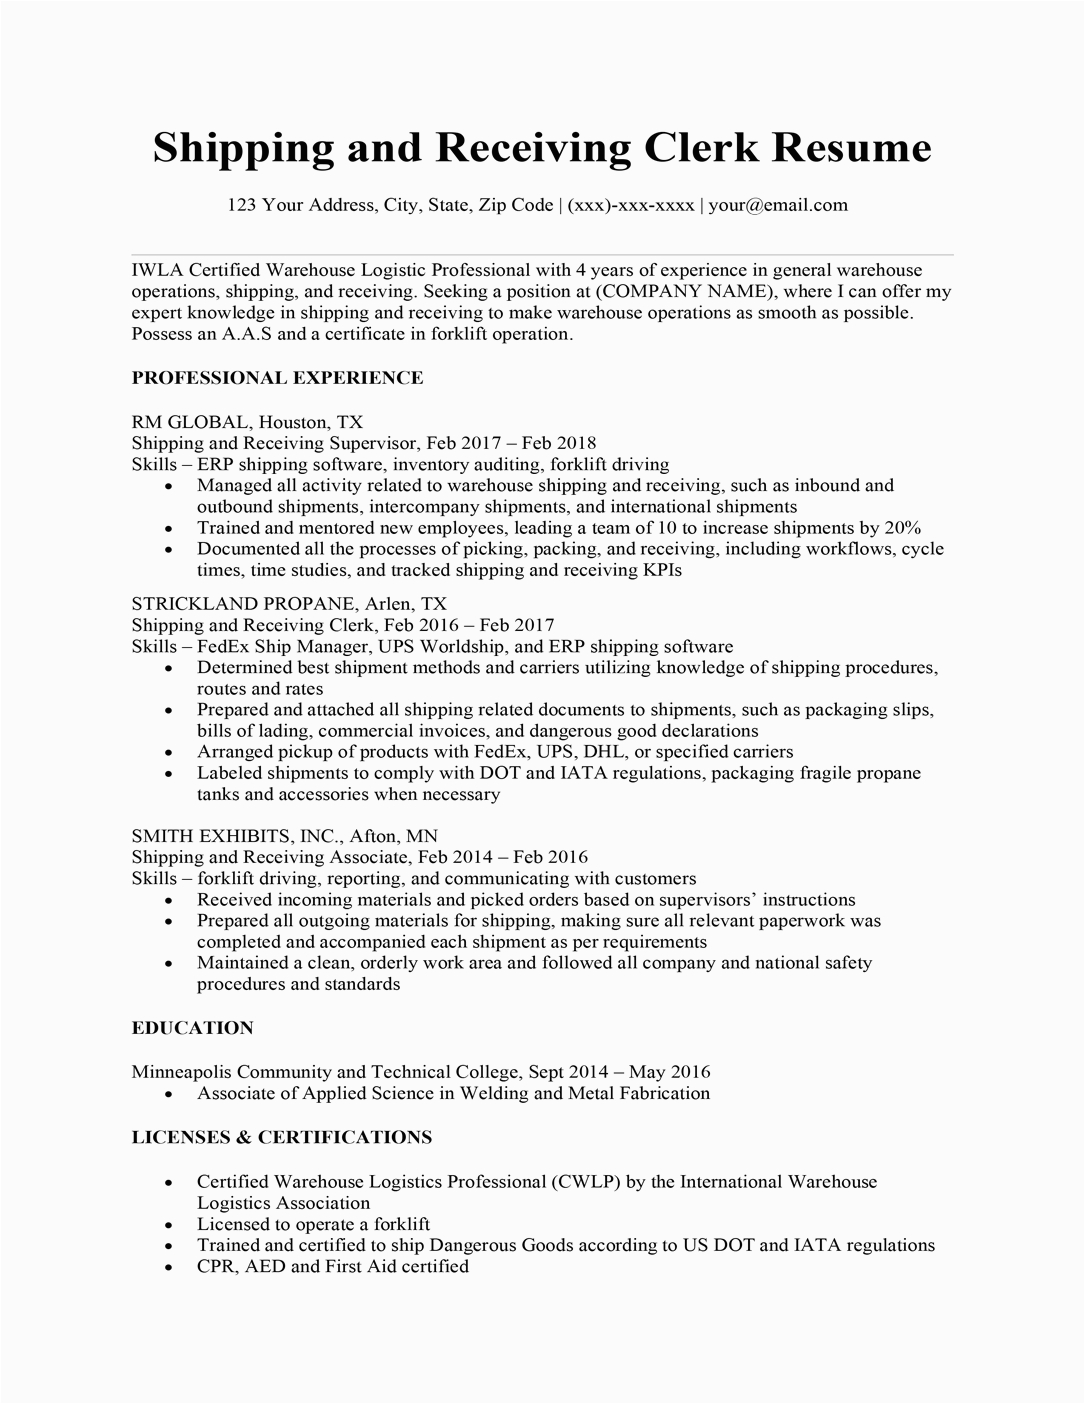 Resume Sample for A Shipping Clerk Shipping and Receiving Clerk Resume Sample & Writing Tips